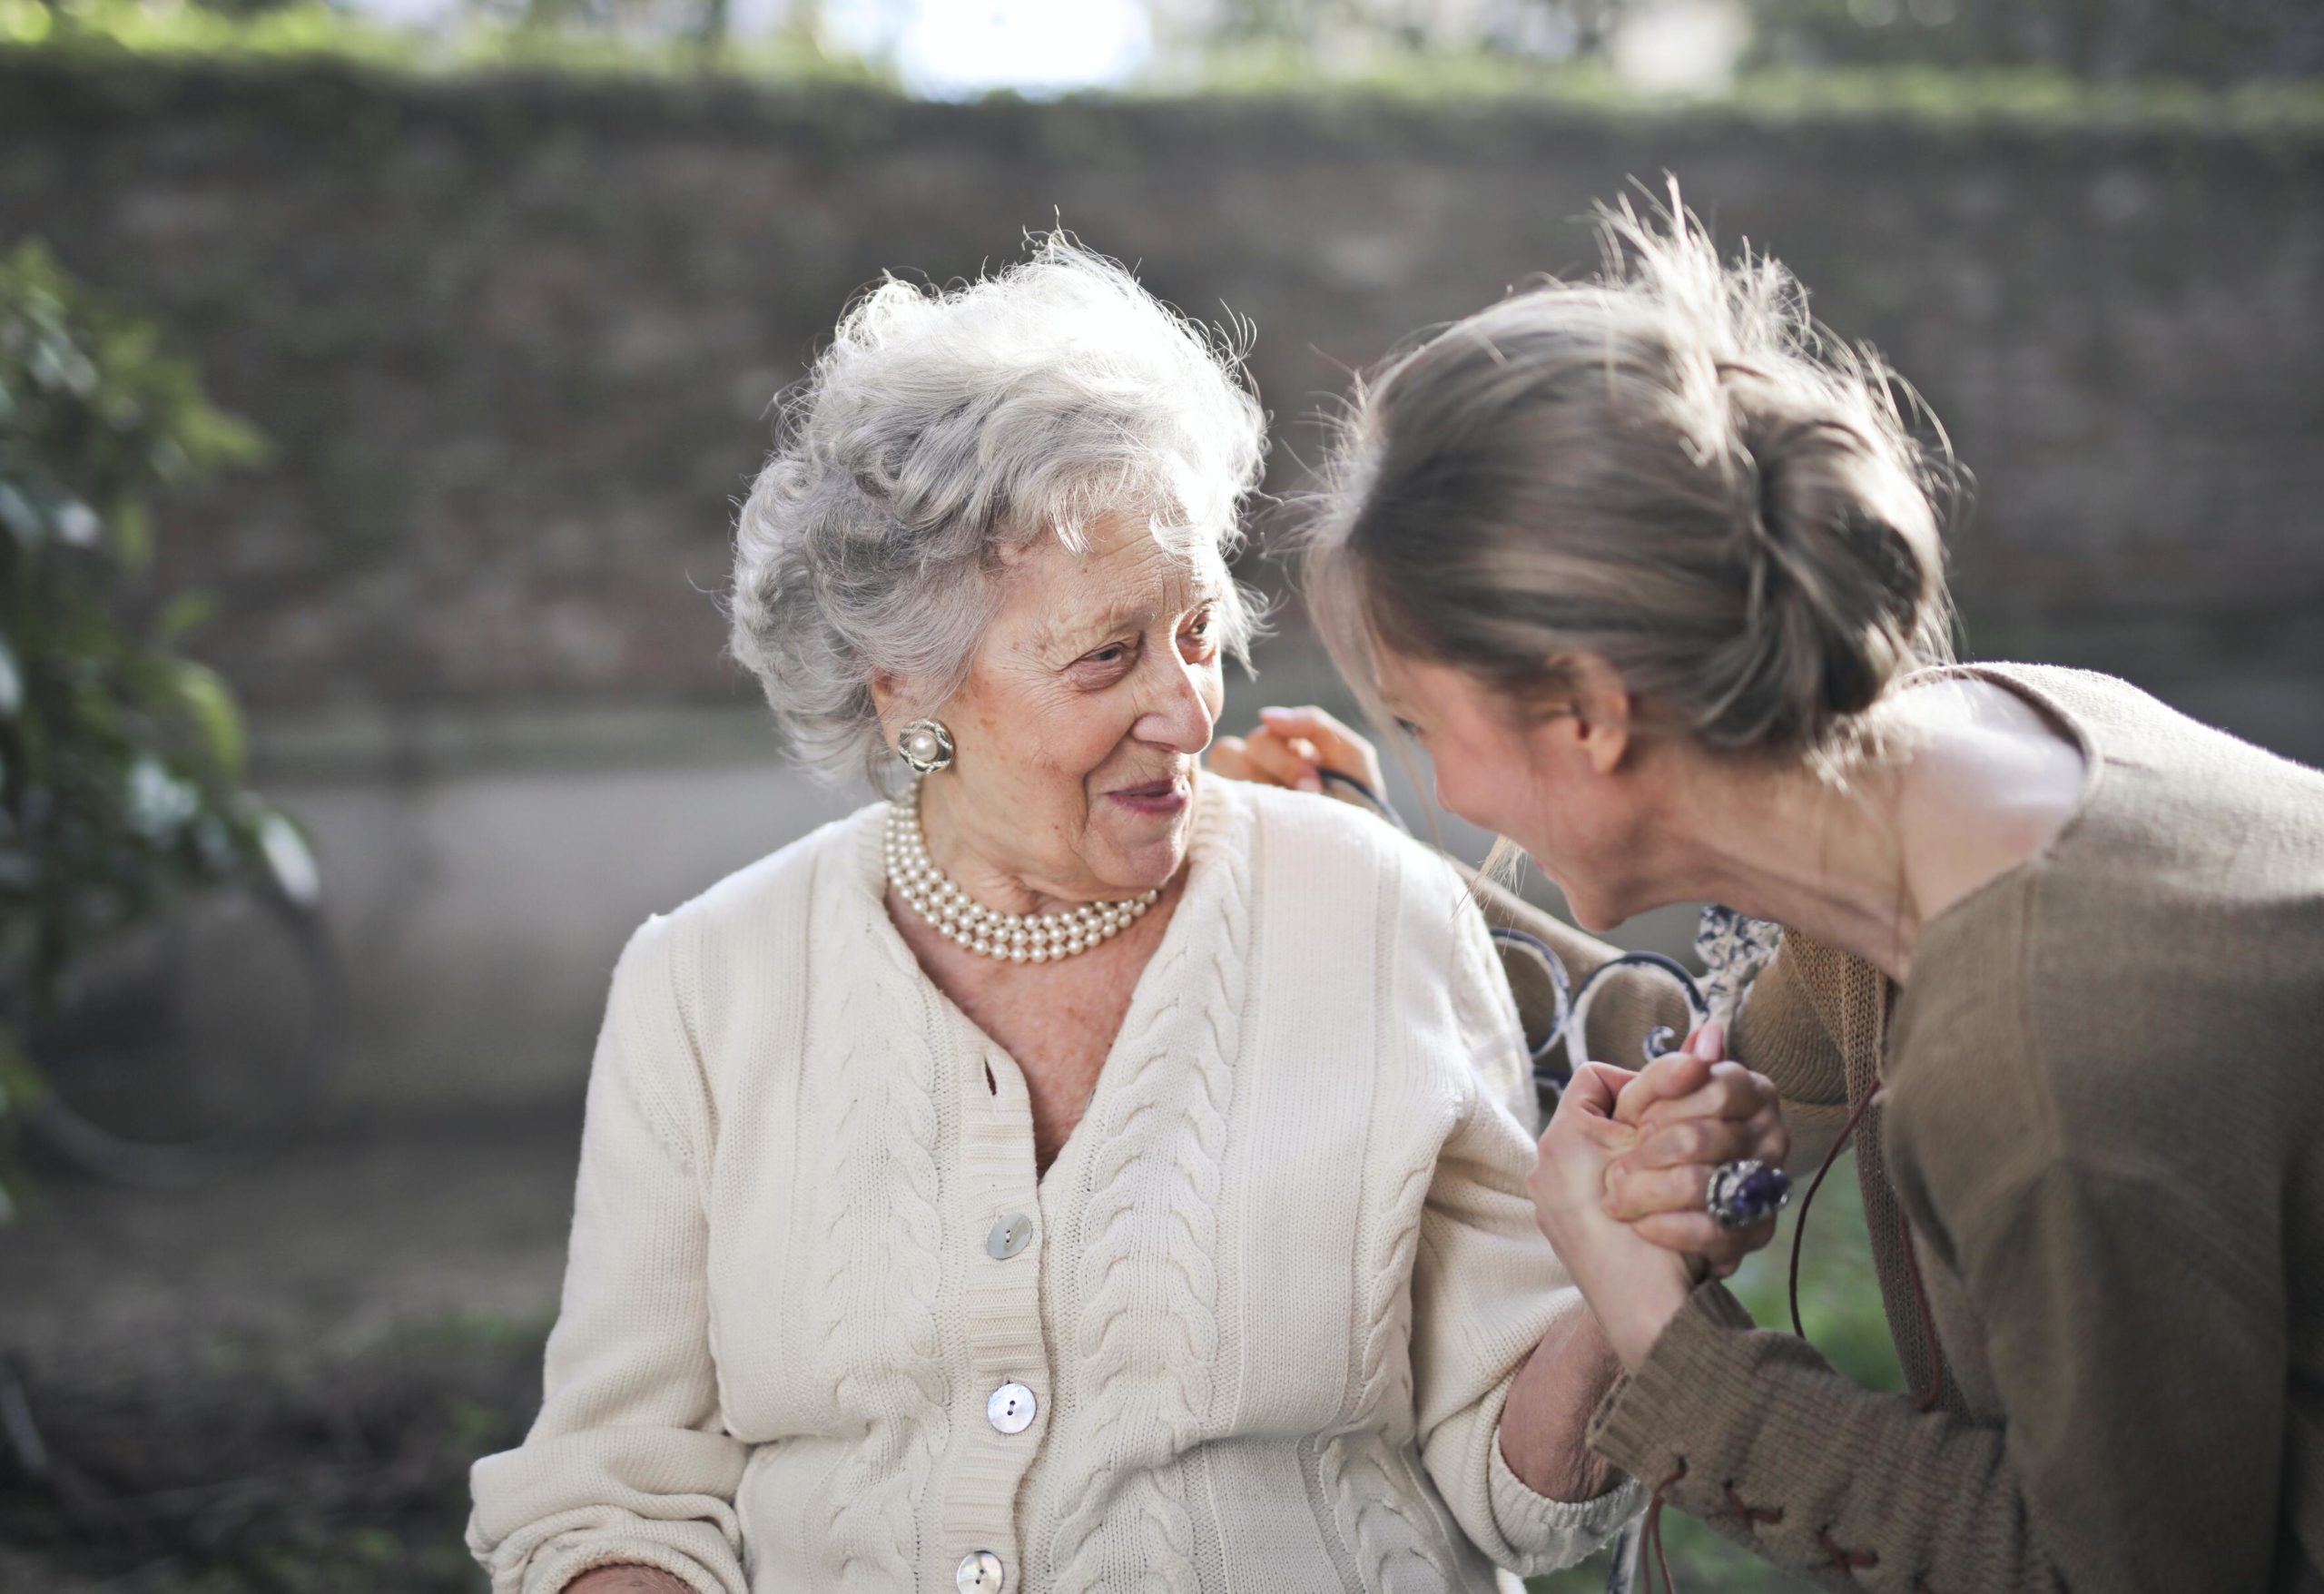 A young woman talks closely with a senior woman who is smiling.